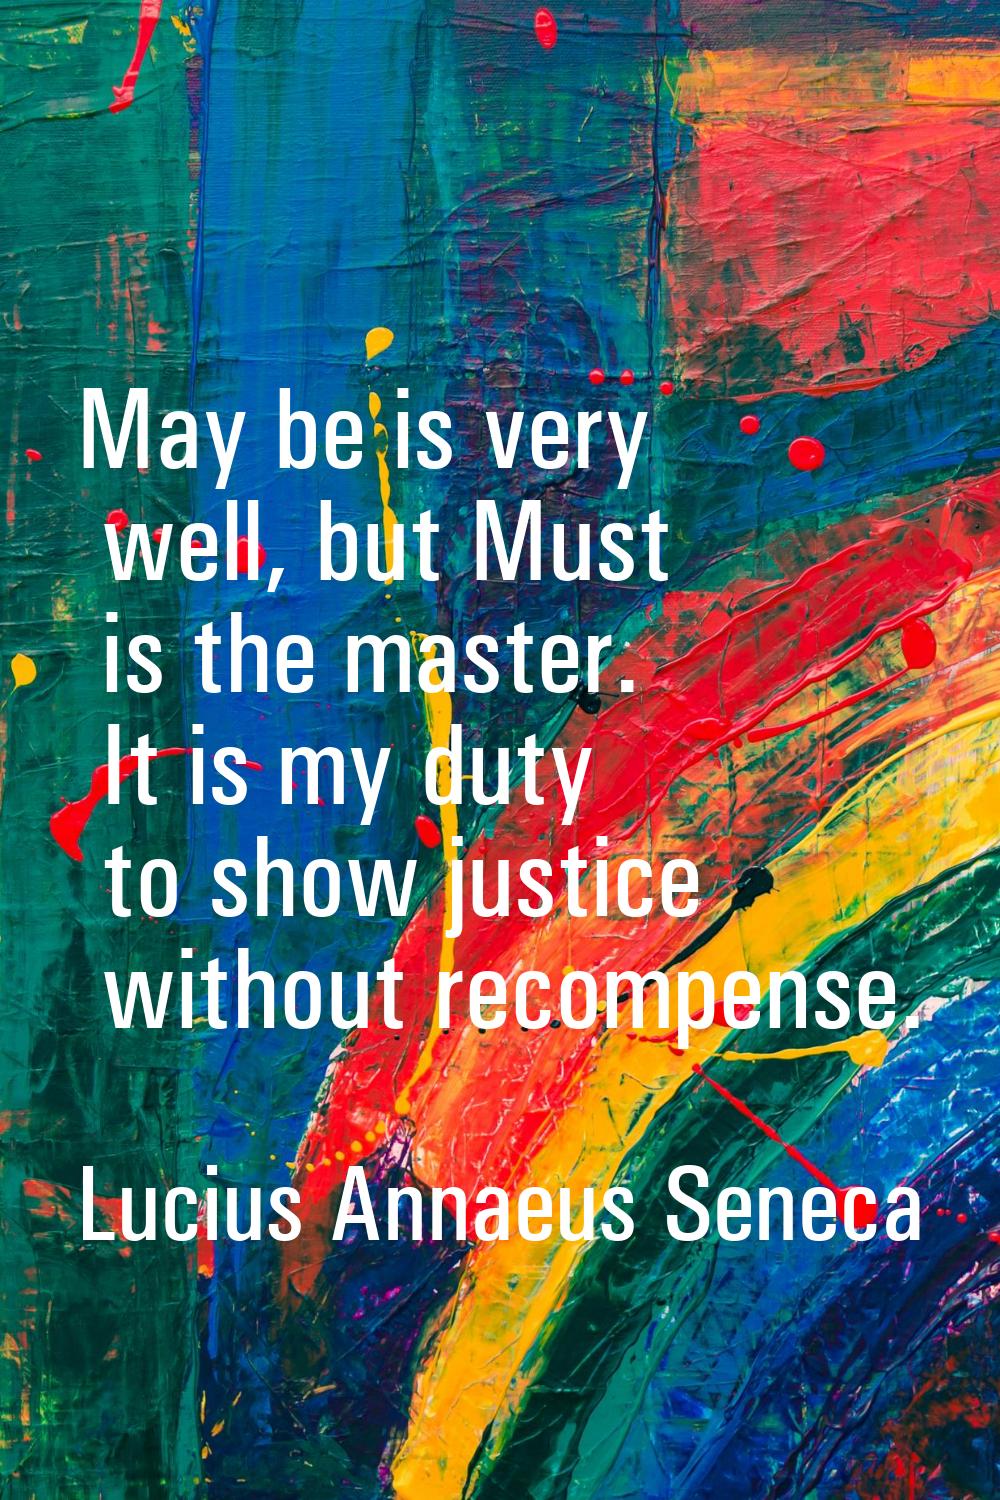 May be is very well, but Must is the master. It is my duty to show justice without recompense.